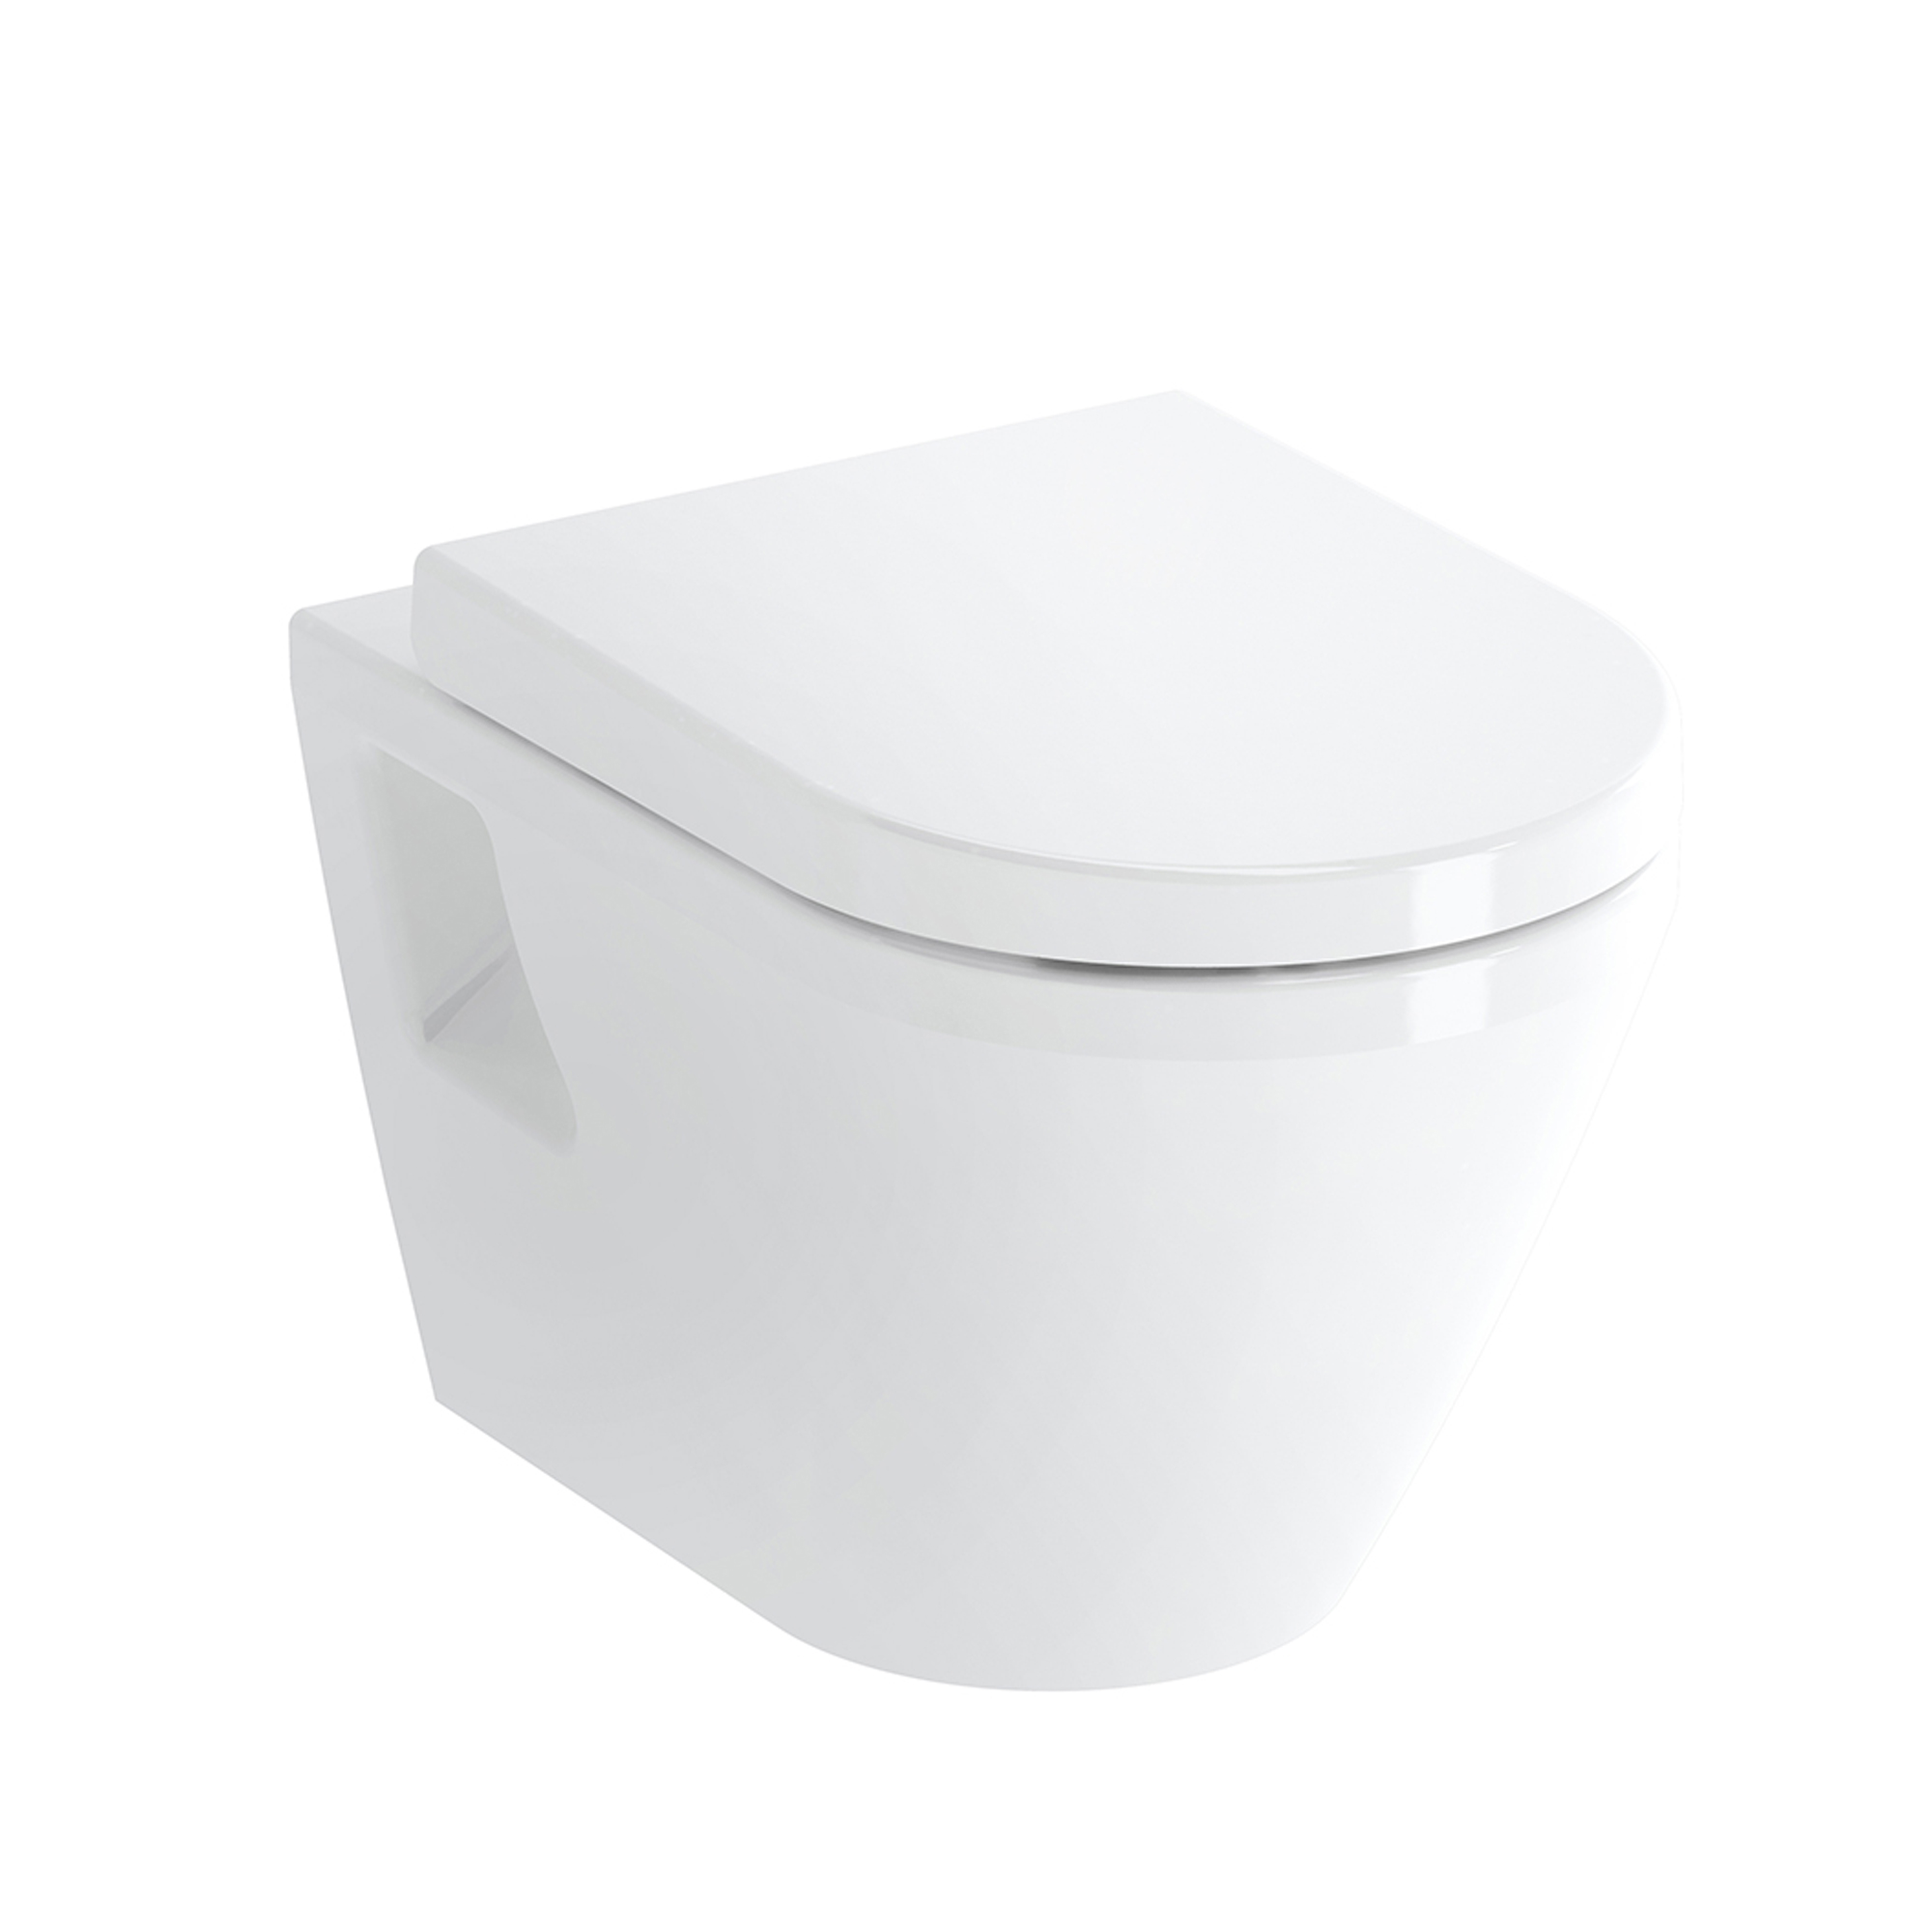 k und abnehmbar data-mtsrclang=en-US href=# onclick=return false; 							show original title Details about   Toilet Seat to fit Vitra Integra S80 with automatic closing and removable 